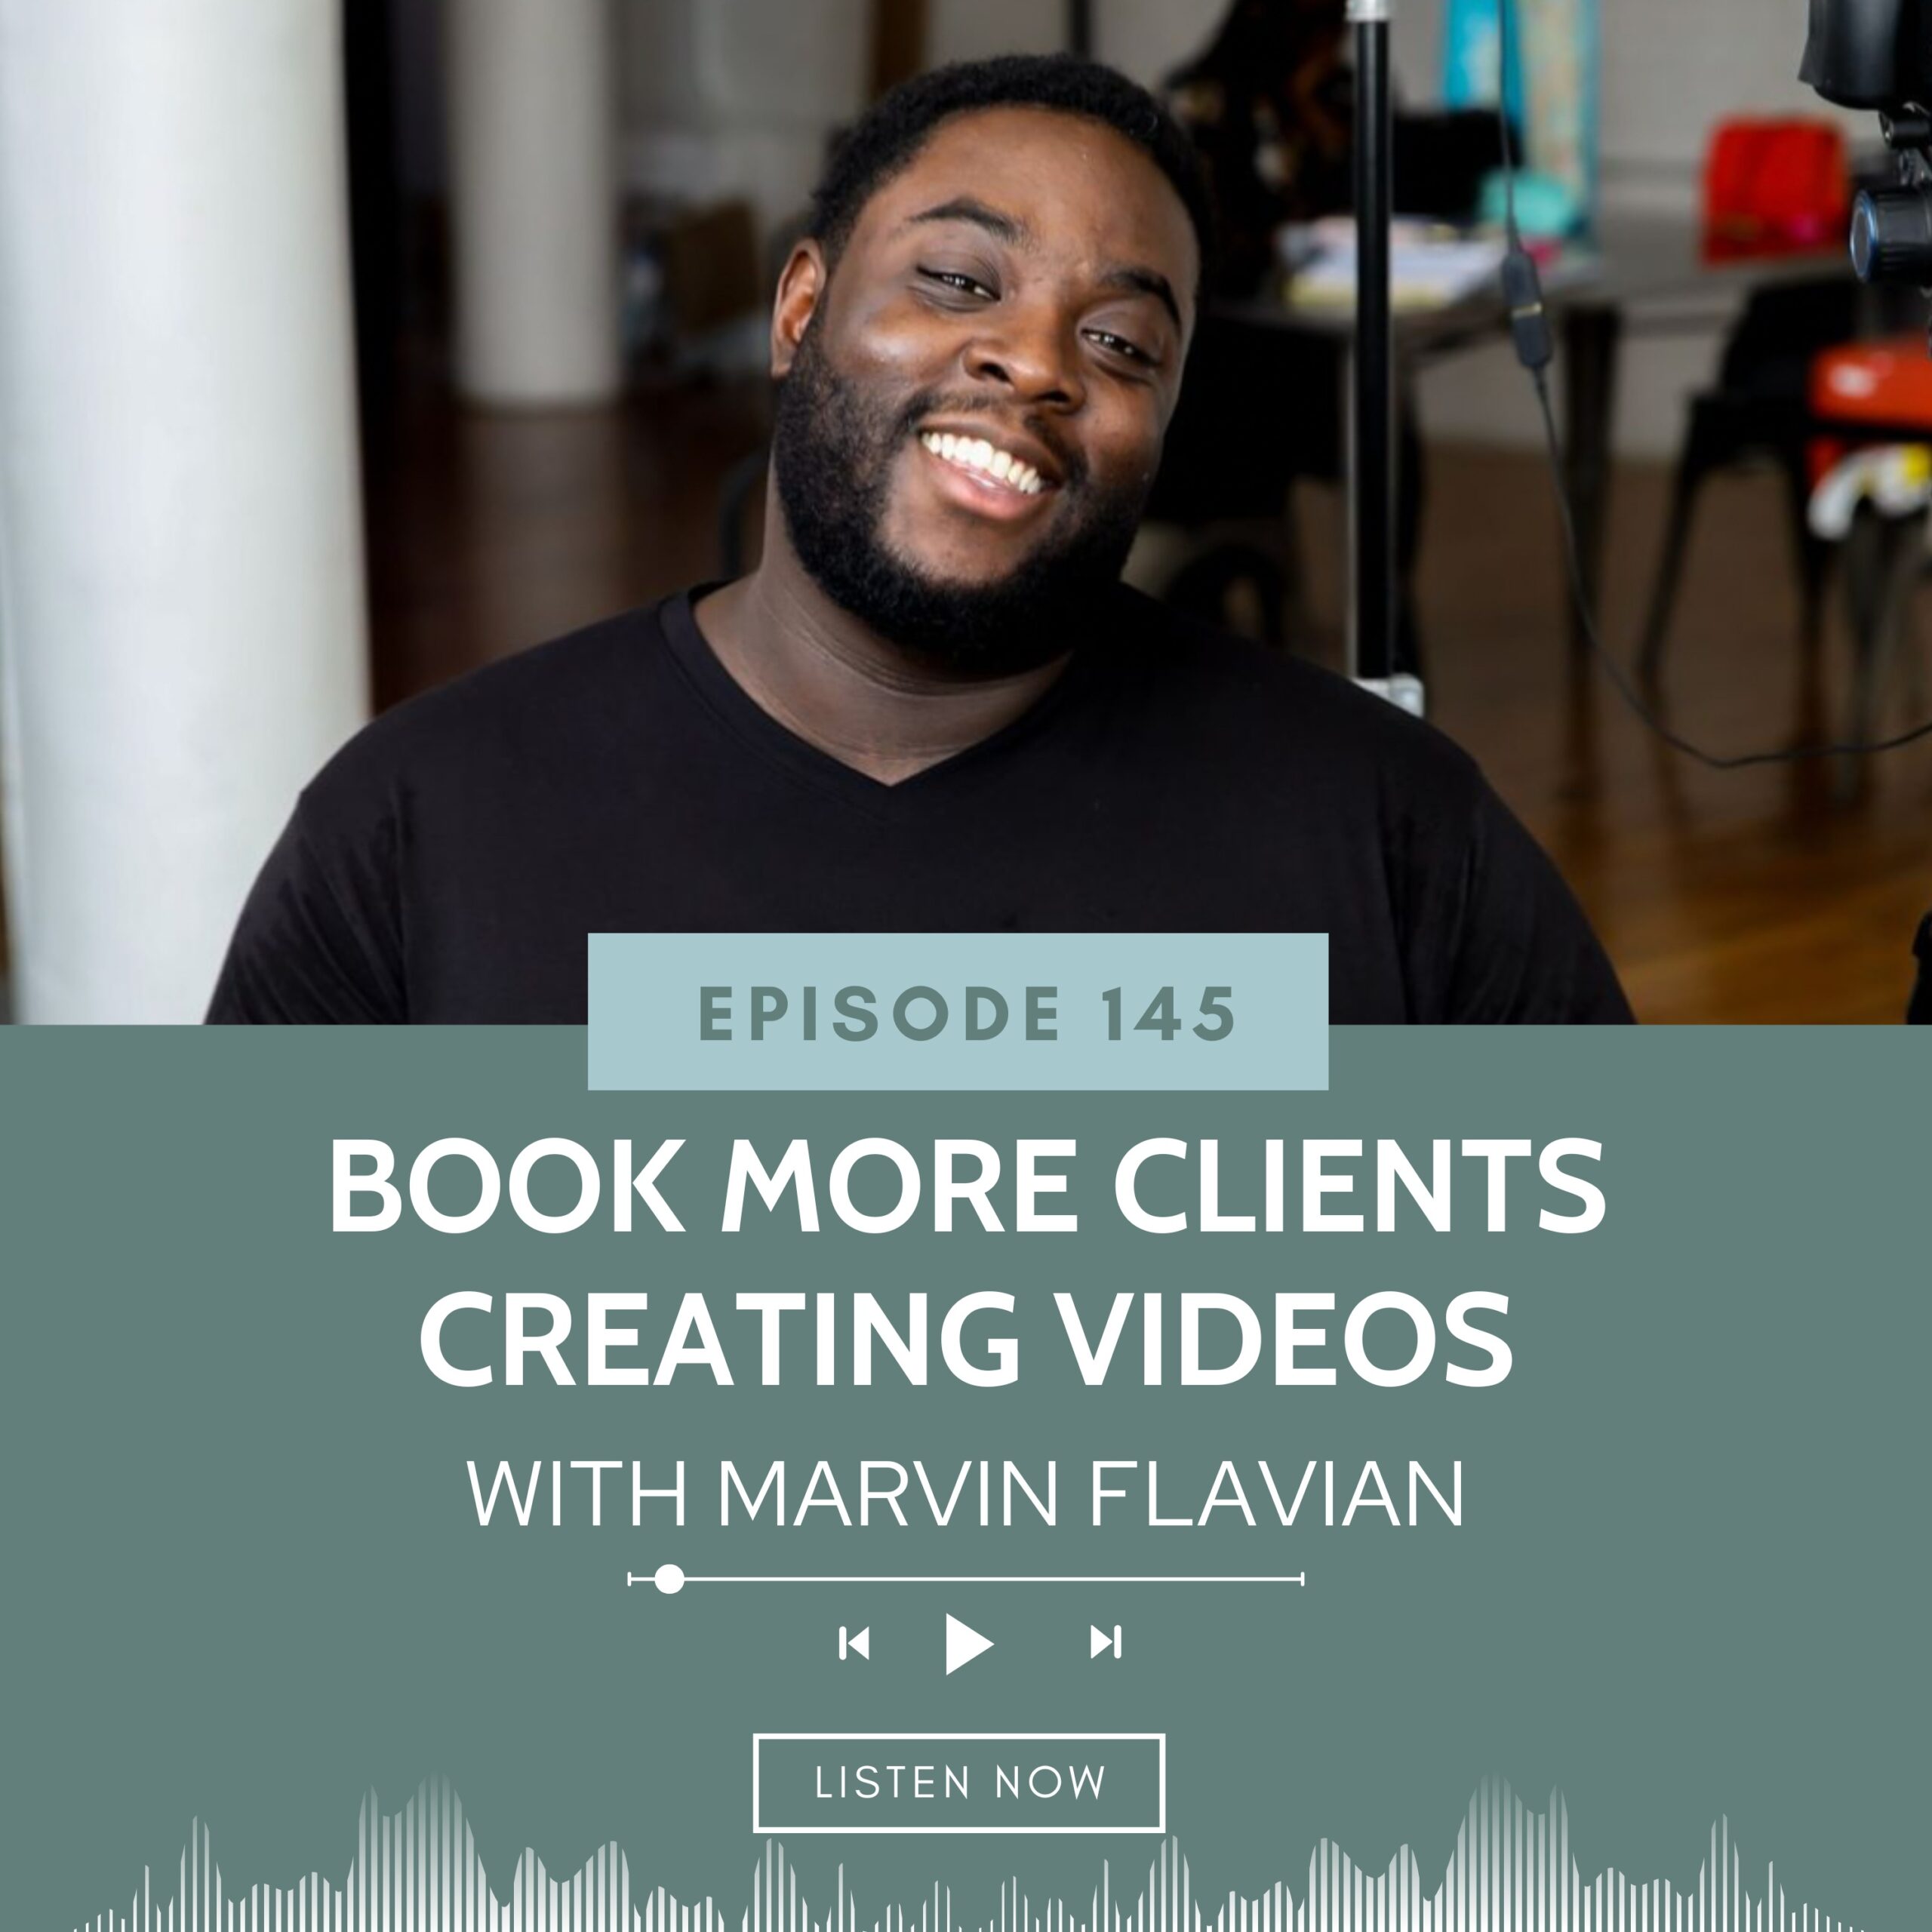 Book More Clients with Video Featuring Marvin Flavien and Quianna Marie Weekly